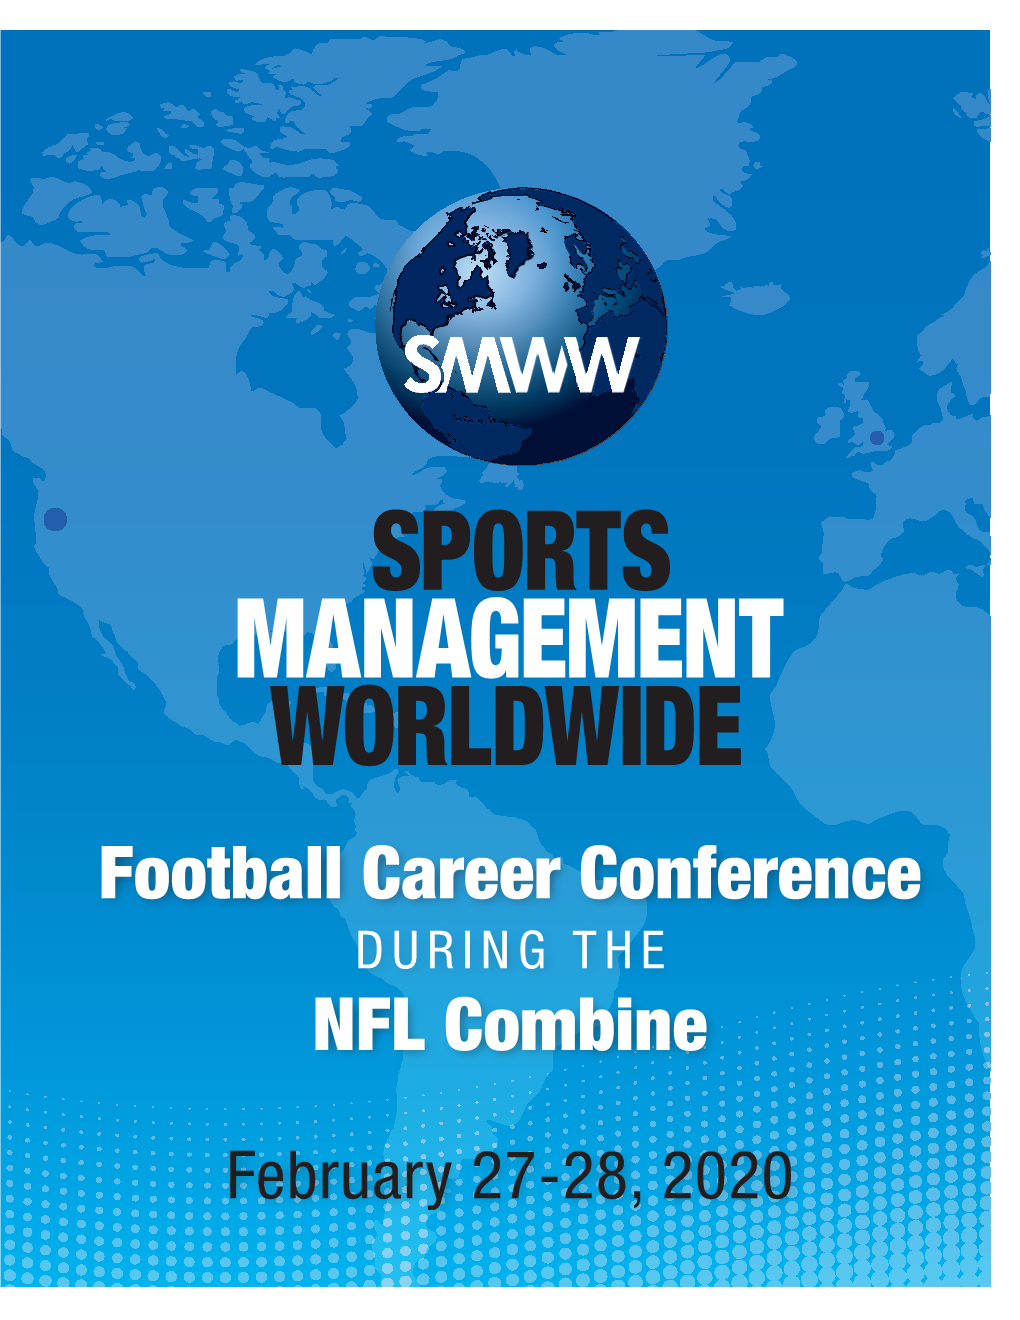 Football Career Conference NFL Combine